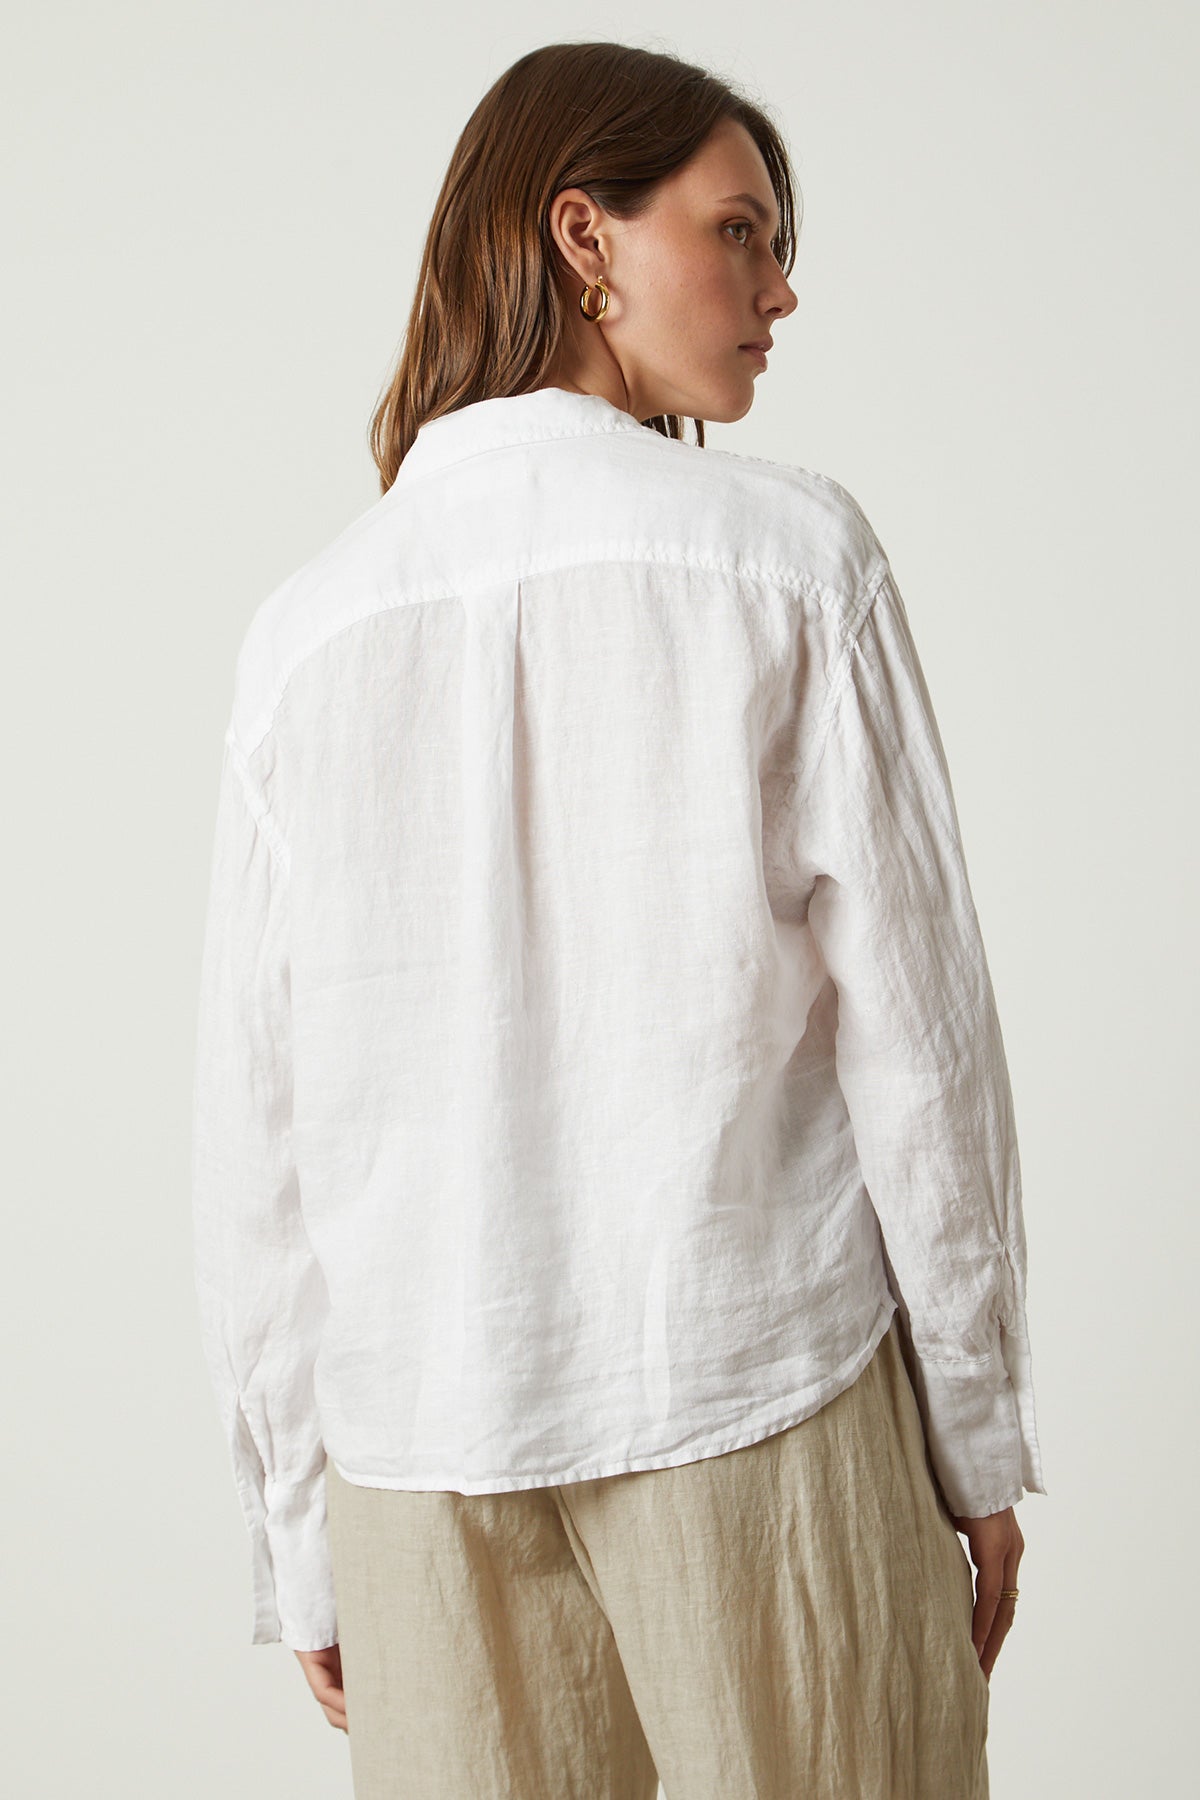 Eden button up shirt in white with Lola pant in cobble back-26094867284161